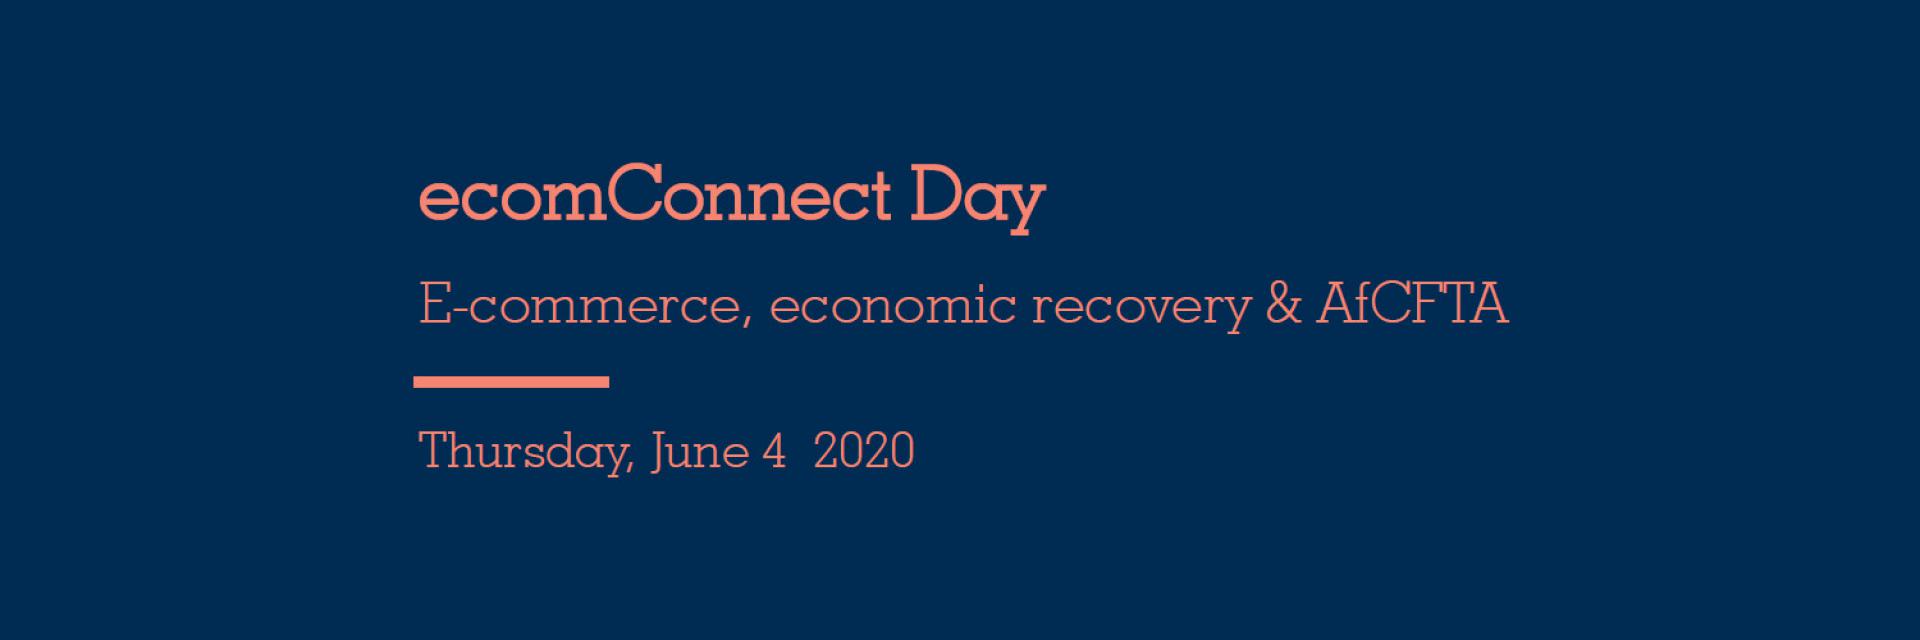 ecomConnect Day: e-commerce, economic recovery and AfCFTA